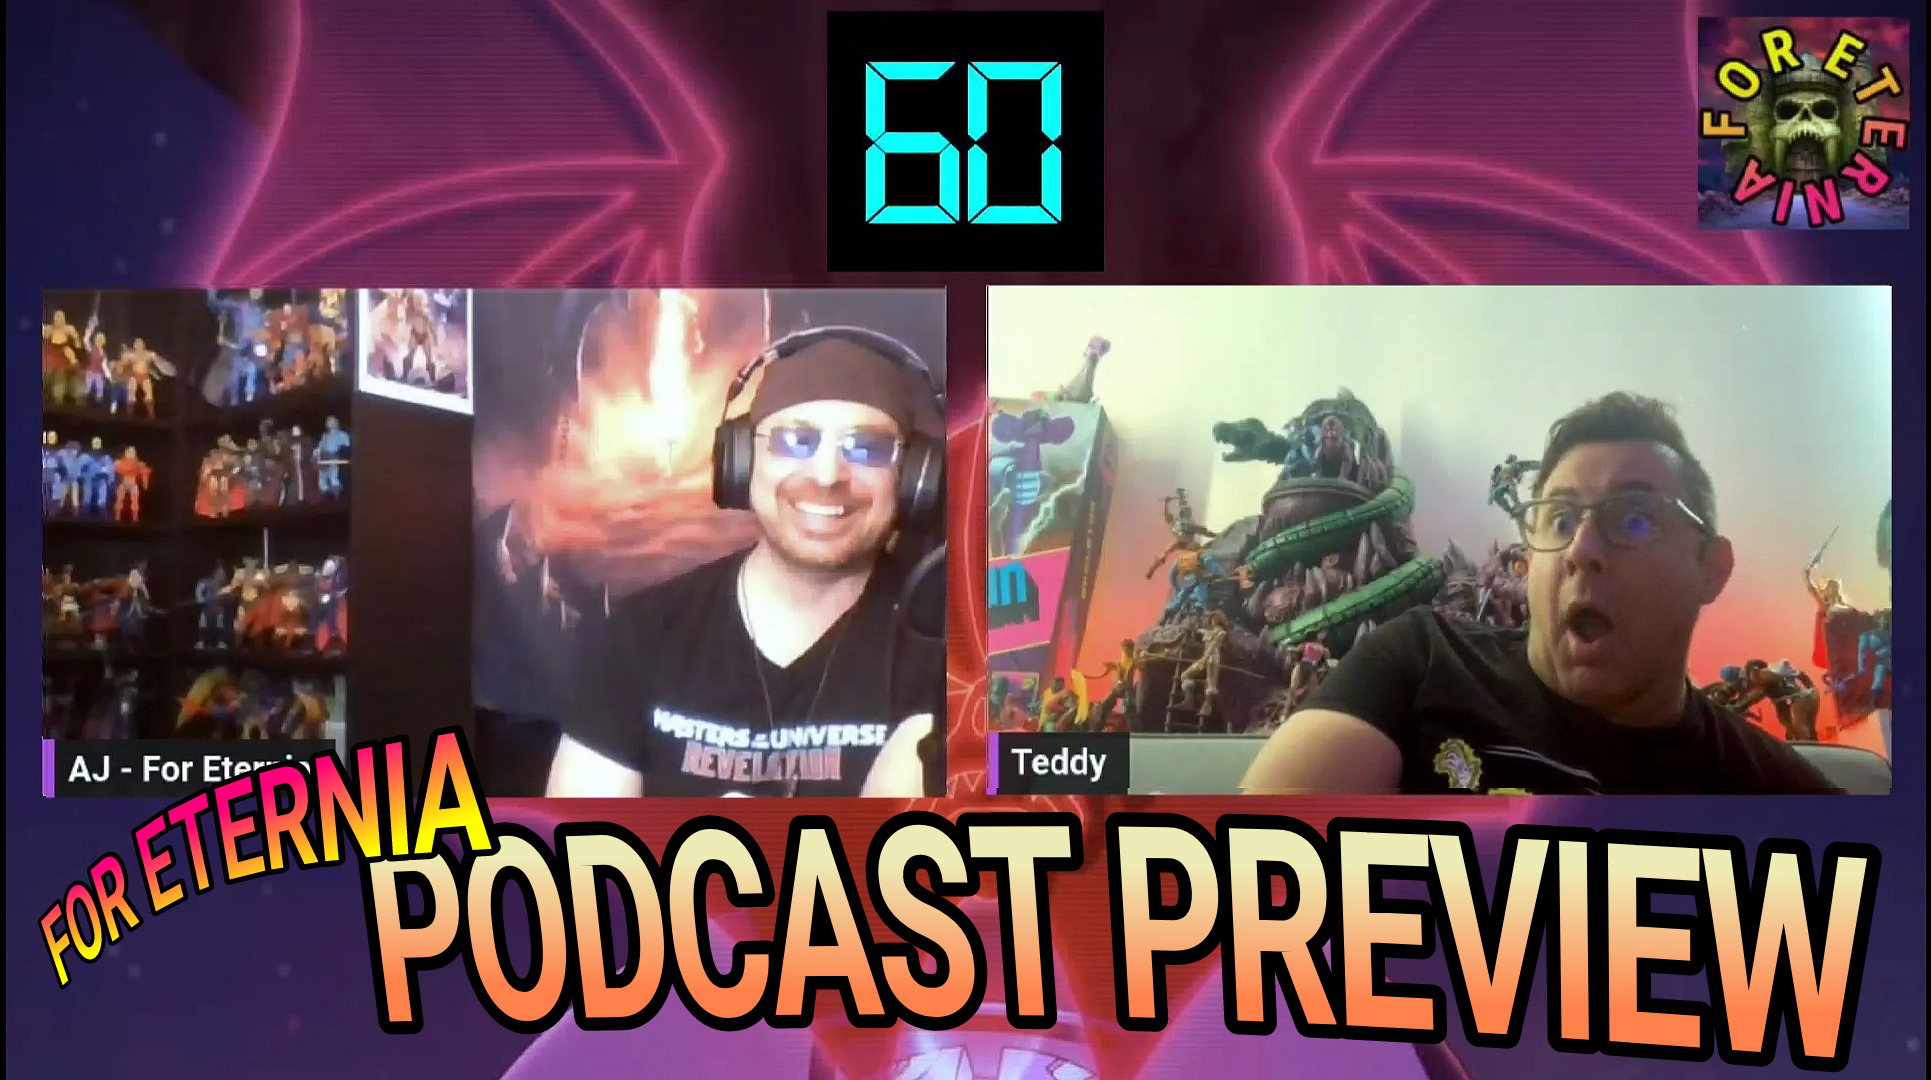 PODCAST PREVIEW! Lightning Round Questions for “Masters of the Universe: Revolution” Executive Producer Teddy Biaselli!